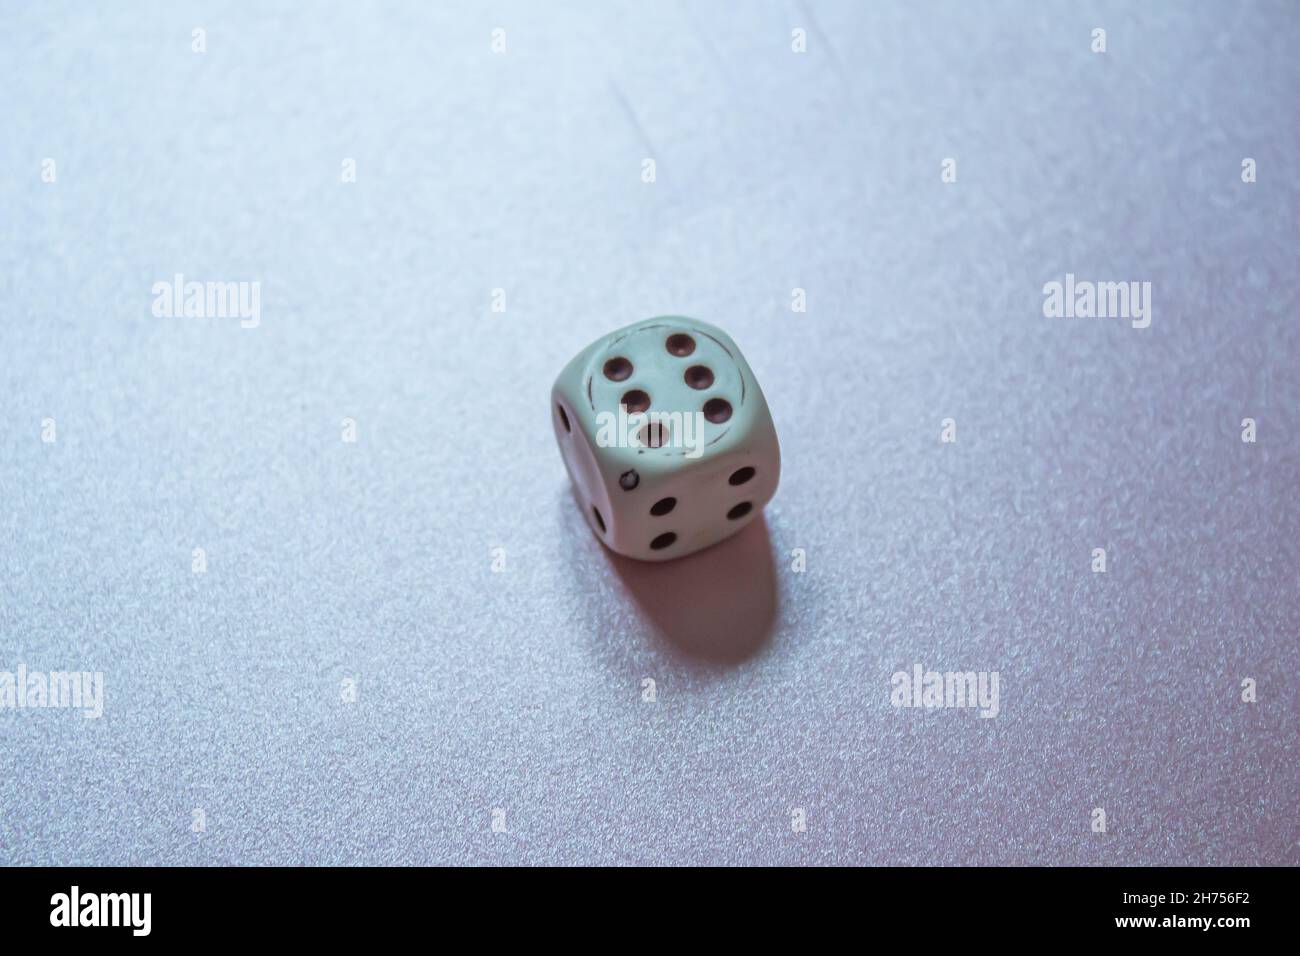 Top view dice, old white dice isolated on shiny background. Stock Photo